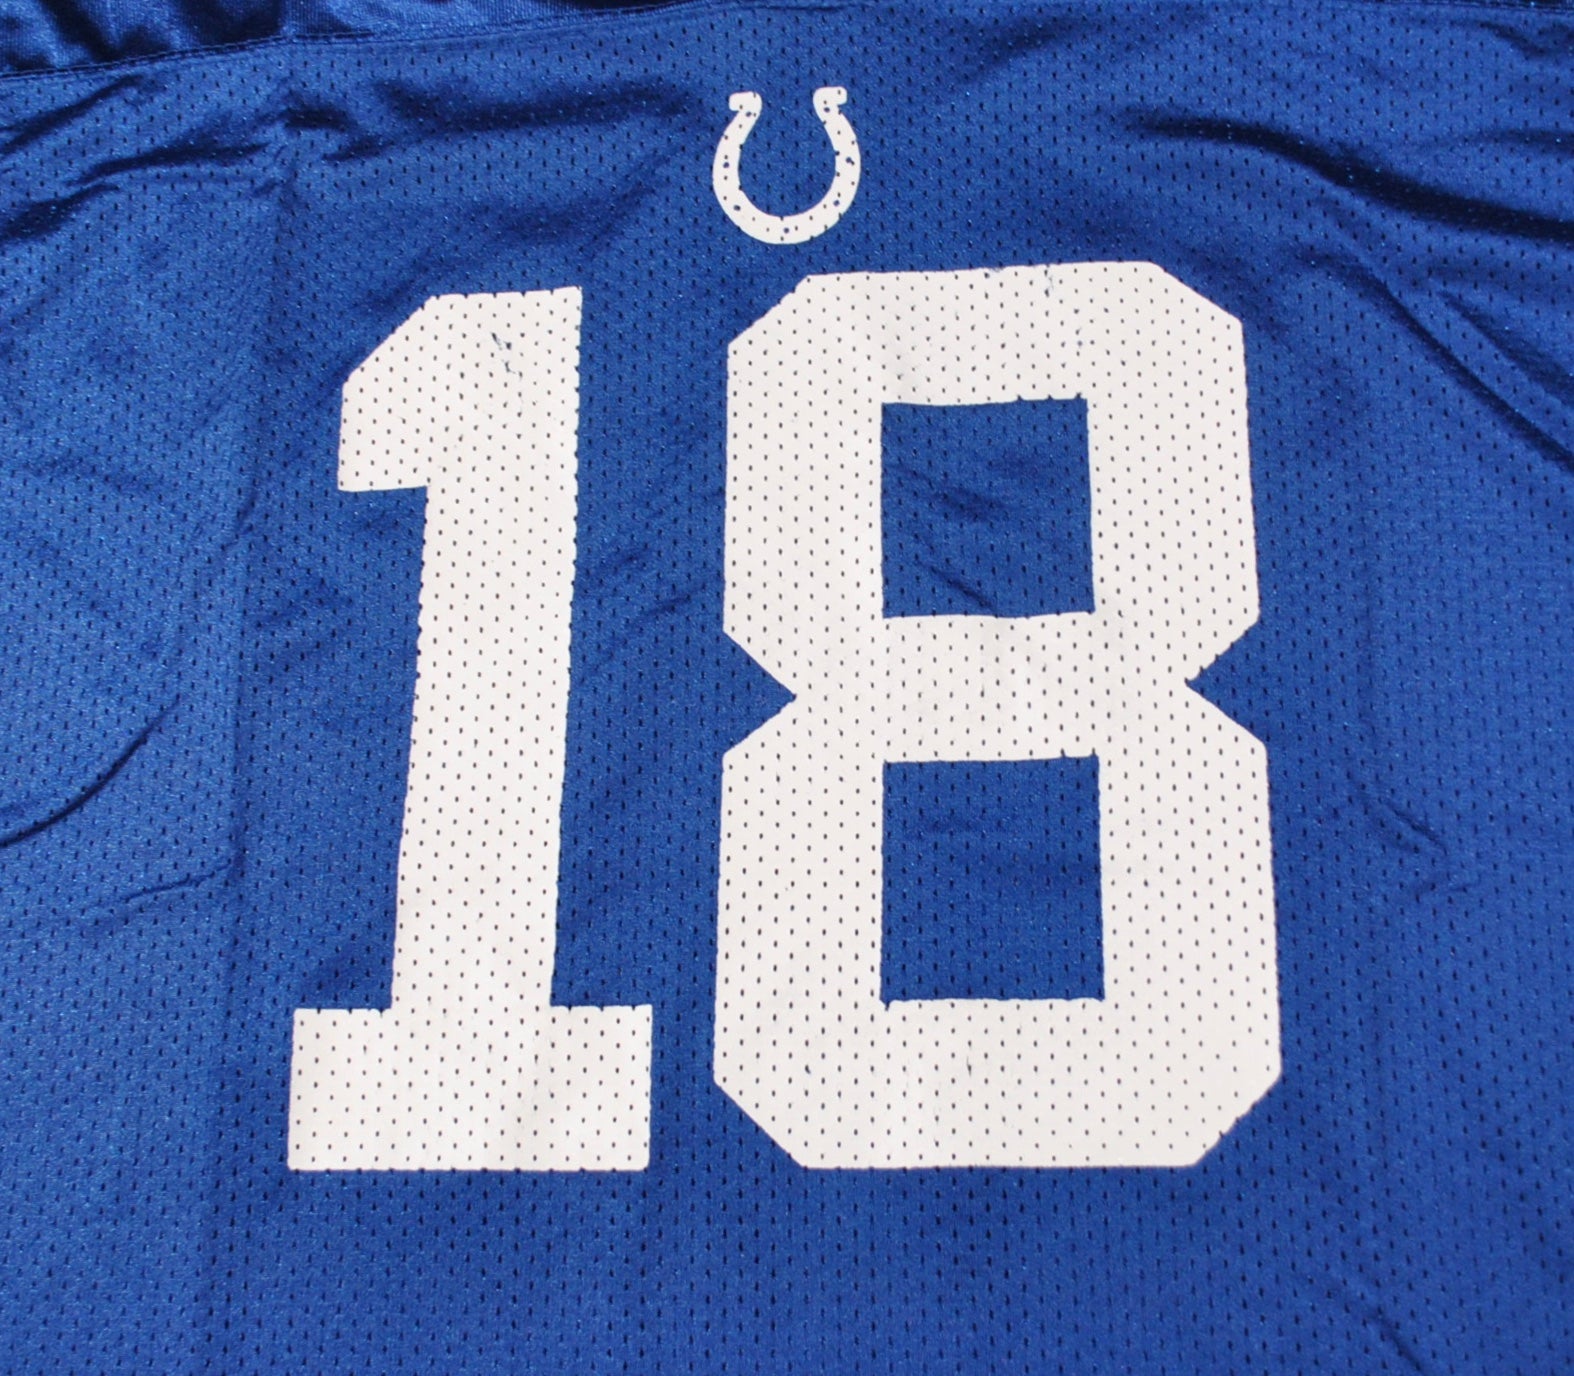 Peyton Manning #16 Indianapolis Colts NFL Super Bowl Jersey Youth S 6-8  child